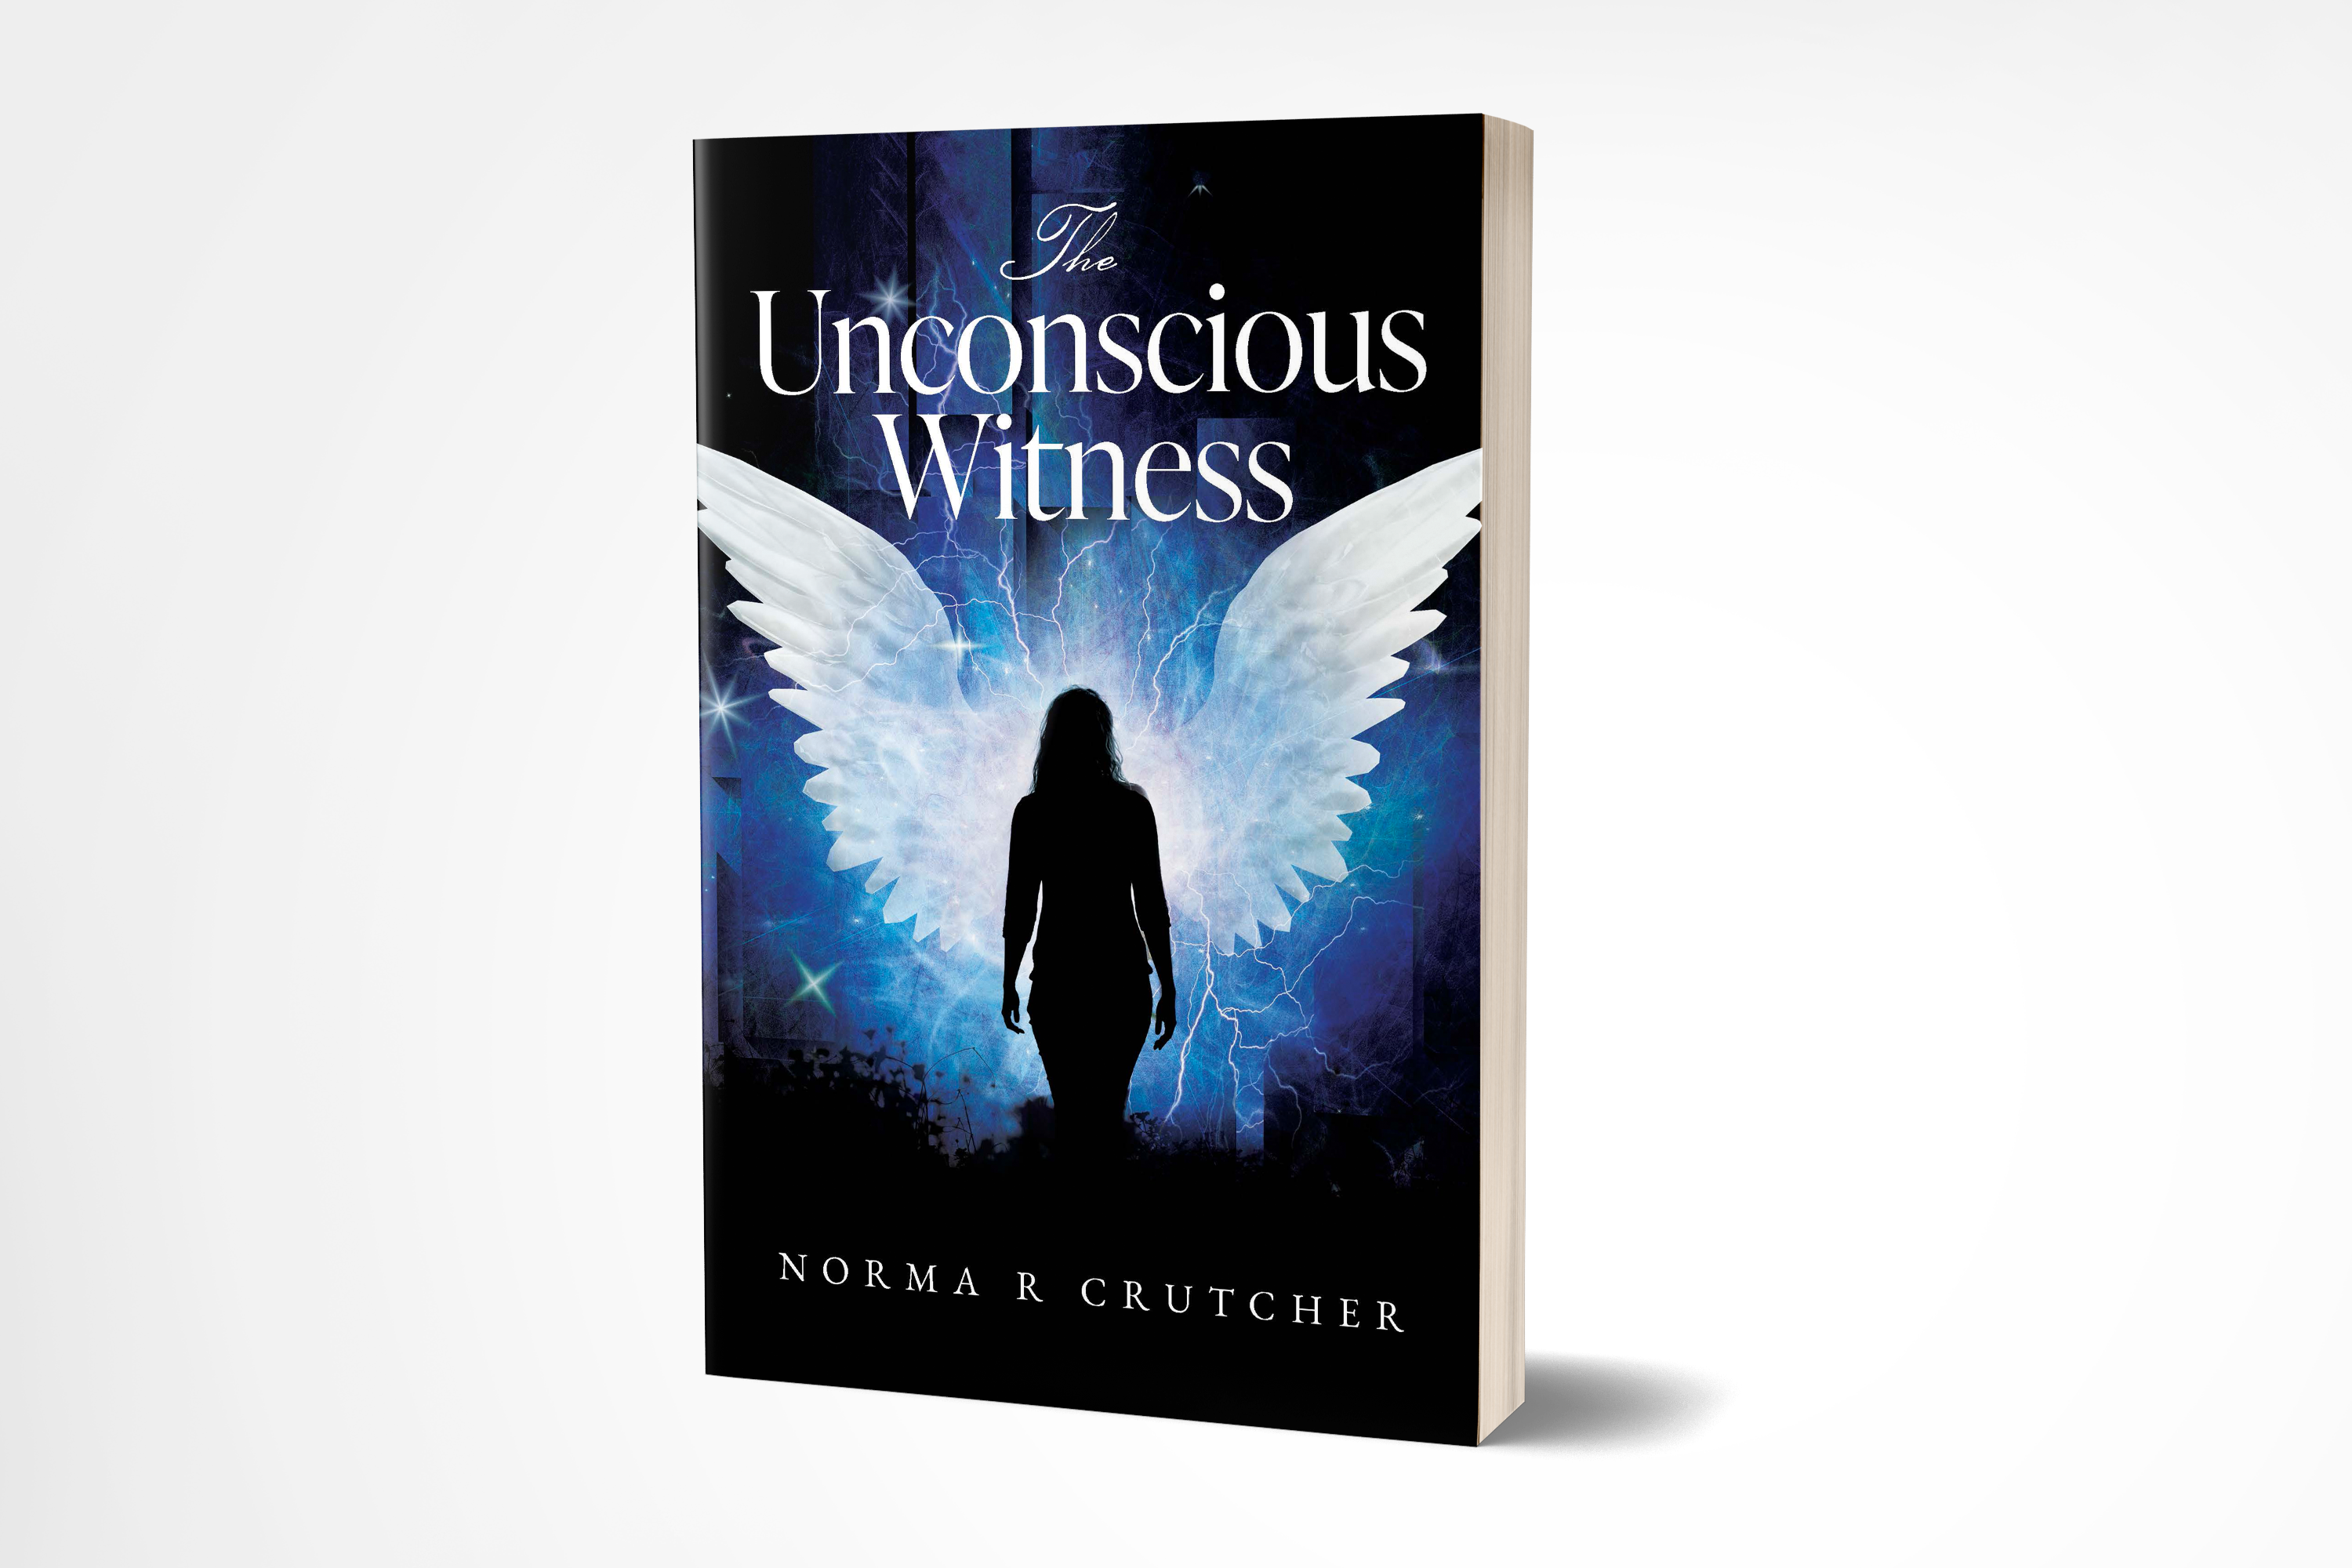 The Unconscious Witness